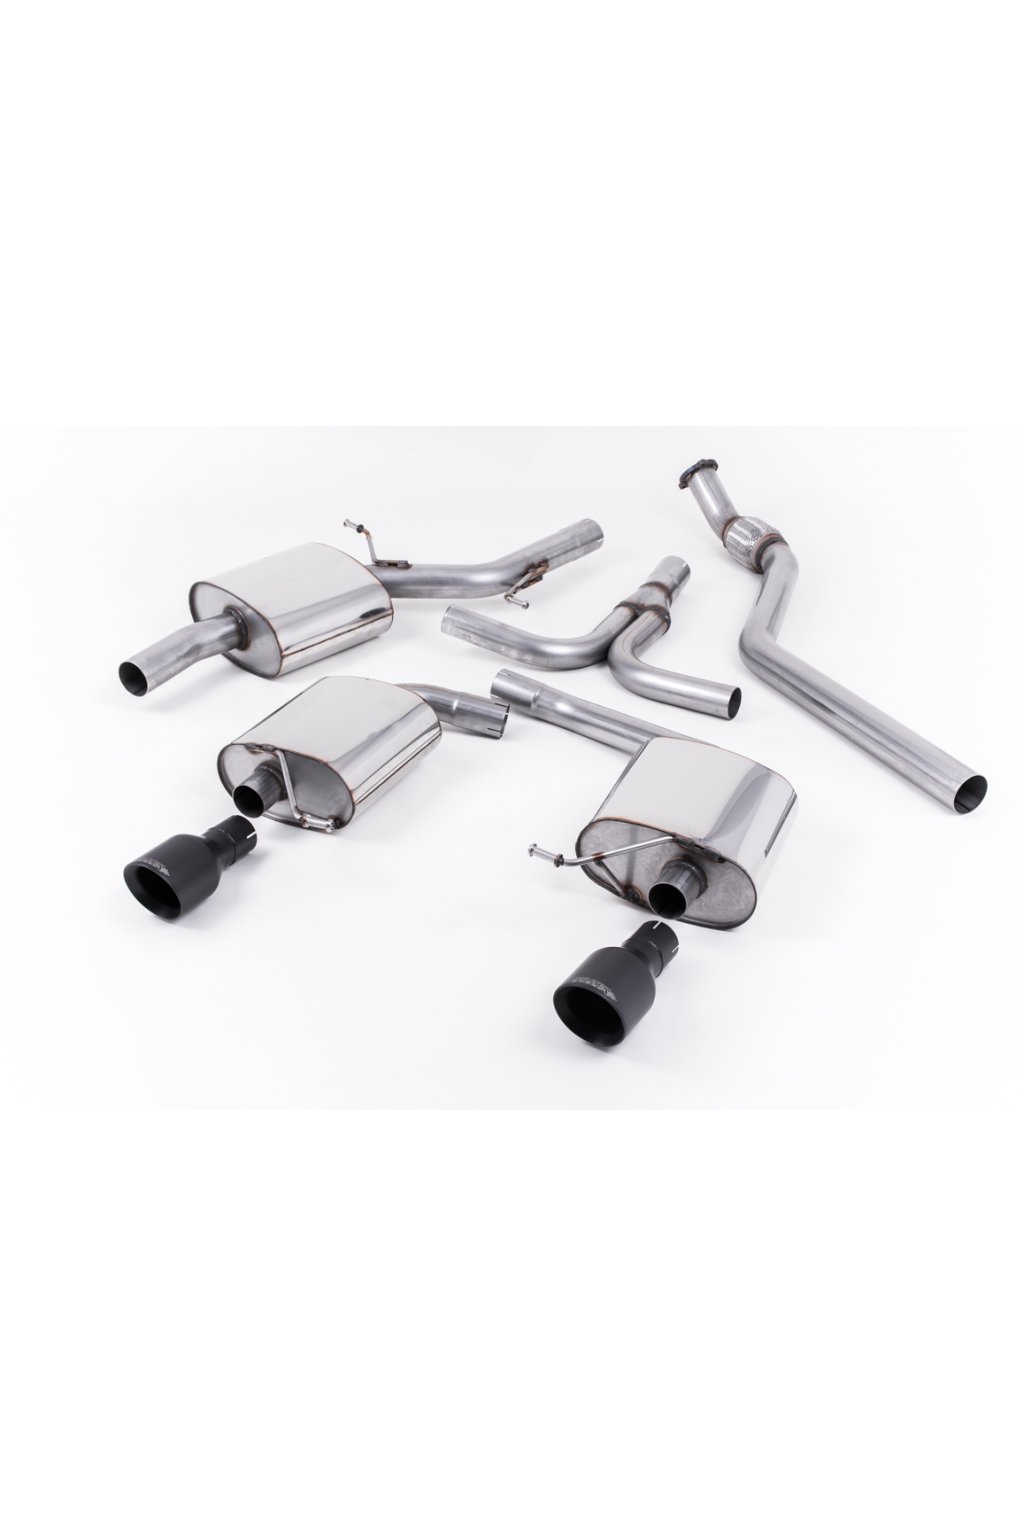 Audi A5 Coupé S line 2.0 TFSI 2WD and quattro (manual only) 2008-2023 Cat-back Exhaust - SSXAU439